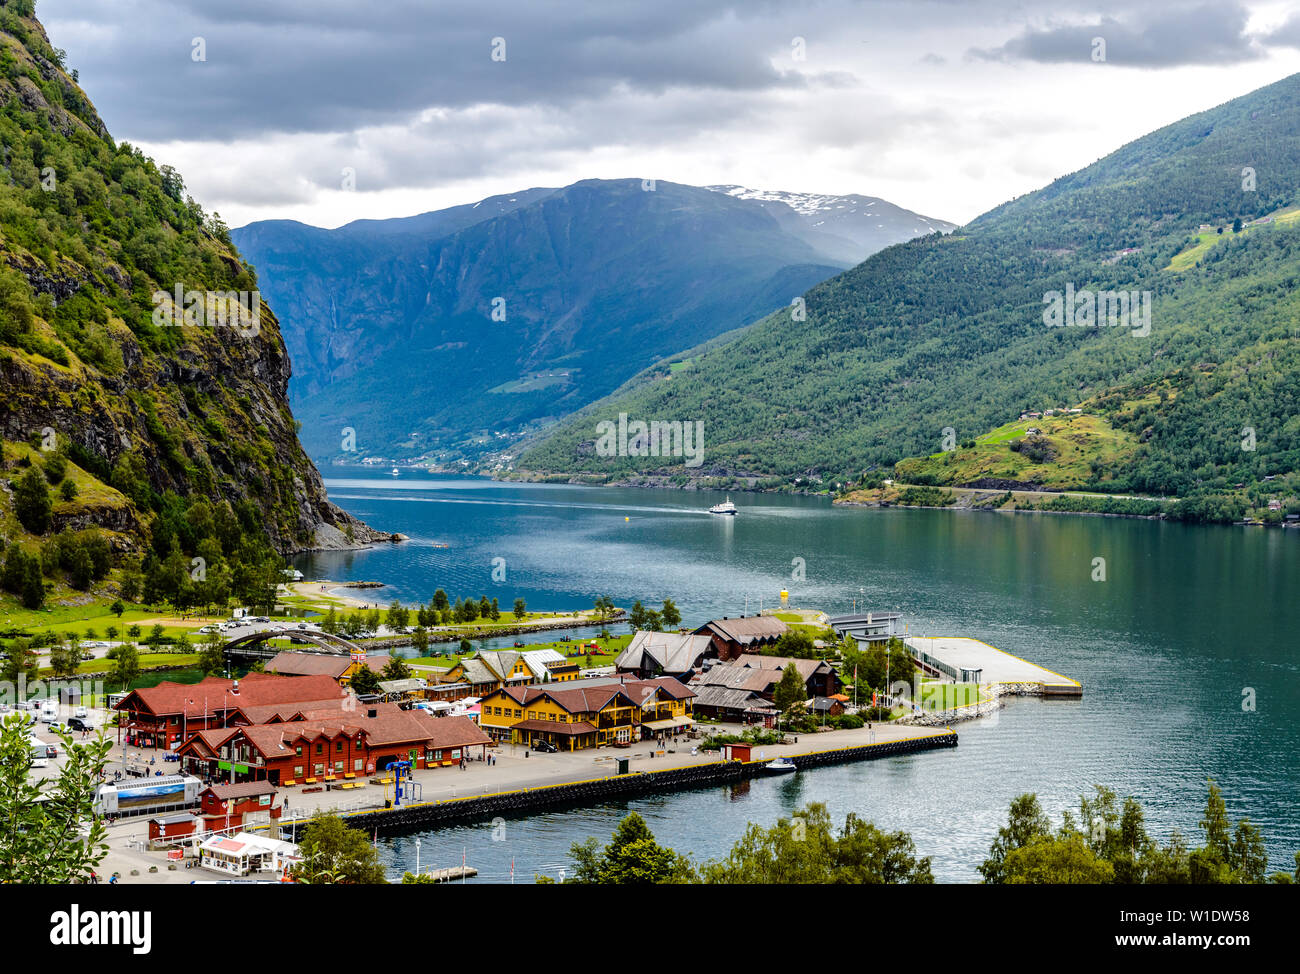 Beautiful aerial landscape view on Aurlandsfjord with a ship, mountains in Flam, Scandinavia, Norway Stock Photo